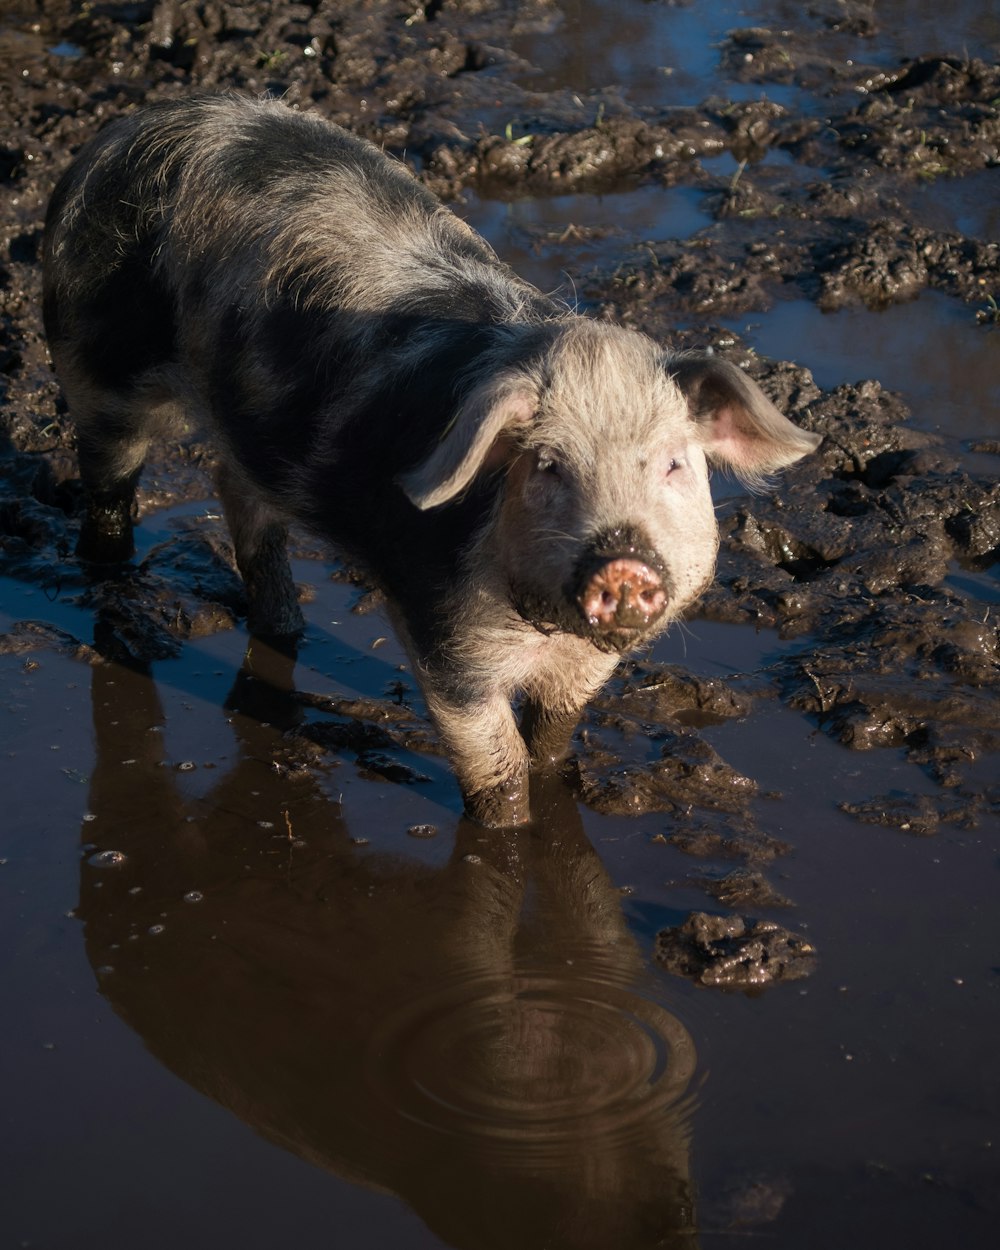 a pig standing in a muddy puddle of water